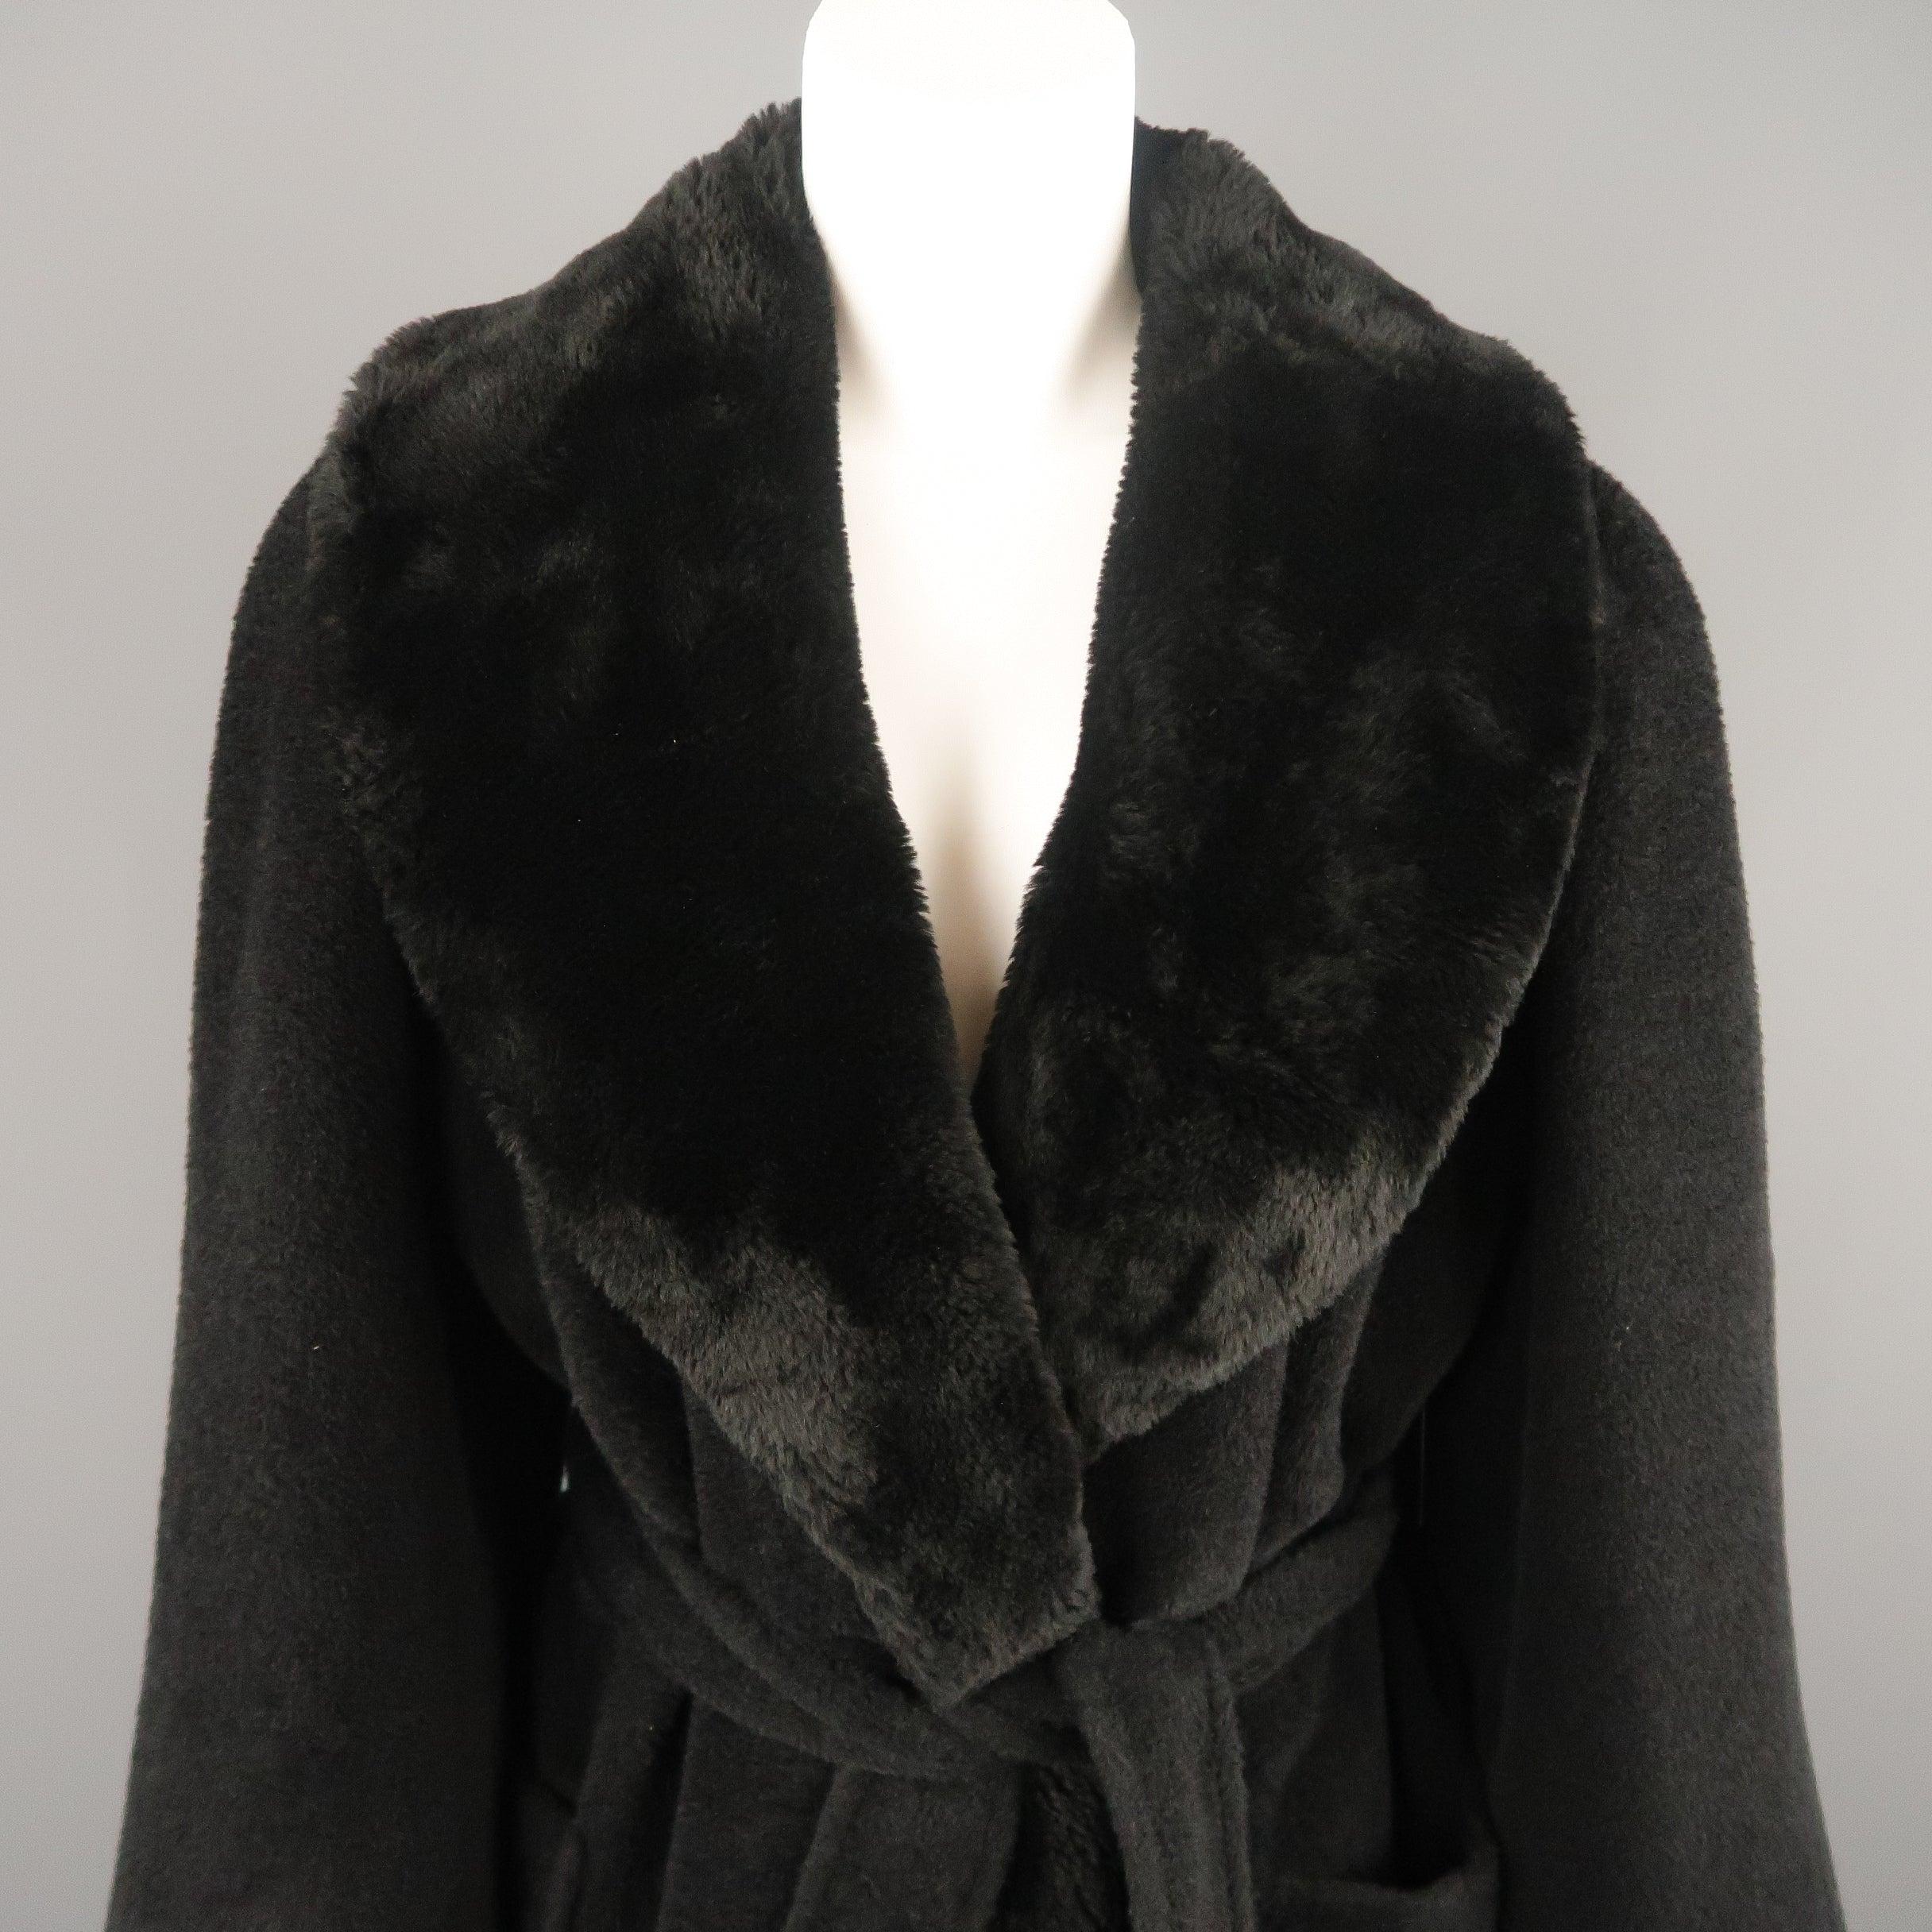 Vintage SONIA RYKIEL for BERGDORF GOODMAN coat comes in black faux fur with a shawl collar, patch pockets, and tied belt waist. Made in France.
Very Good Pre-Owned Condition.
 

Marked:   (no size)
 

Measurements: 
  
l	Shoulder: 21 inches 
l	Bust: